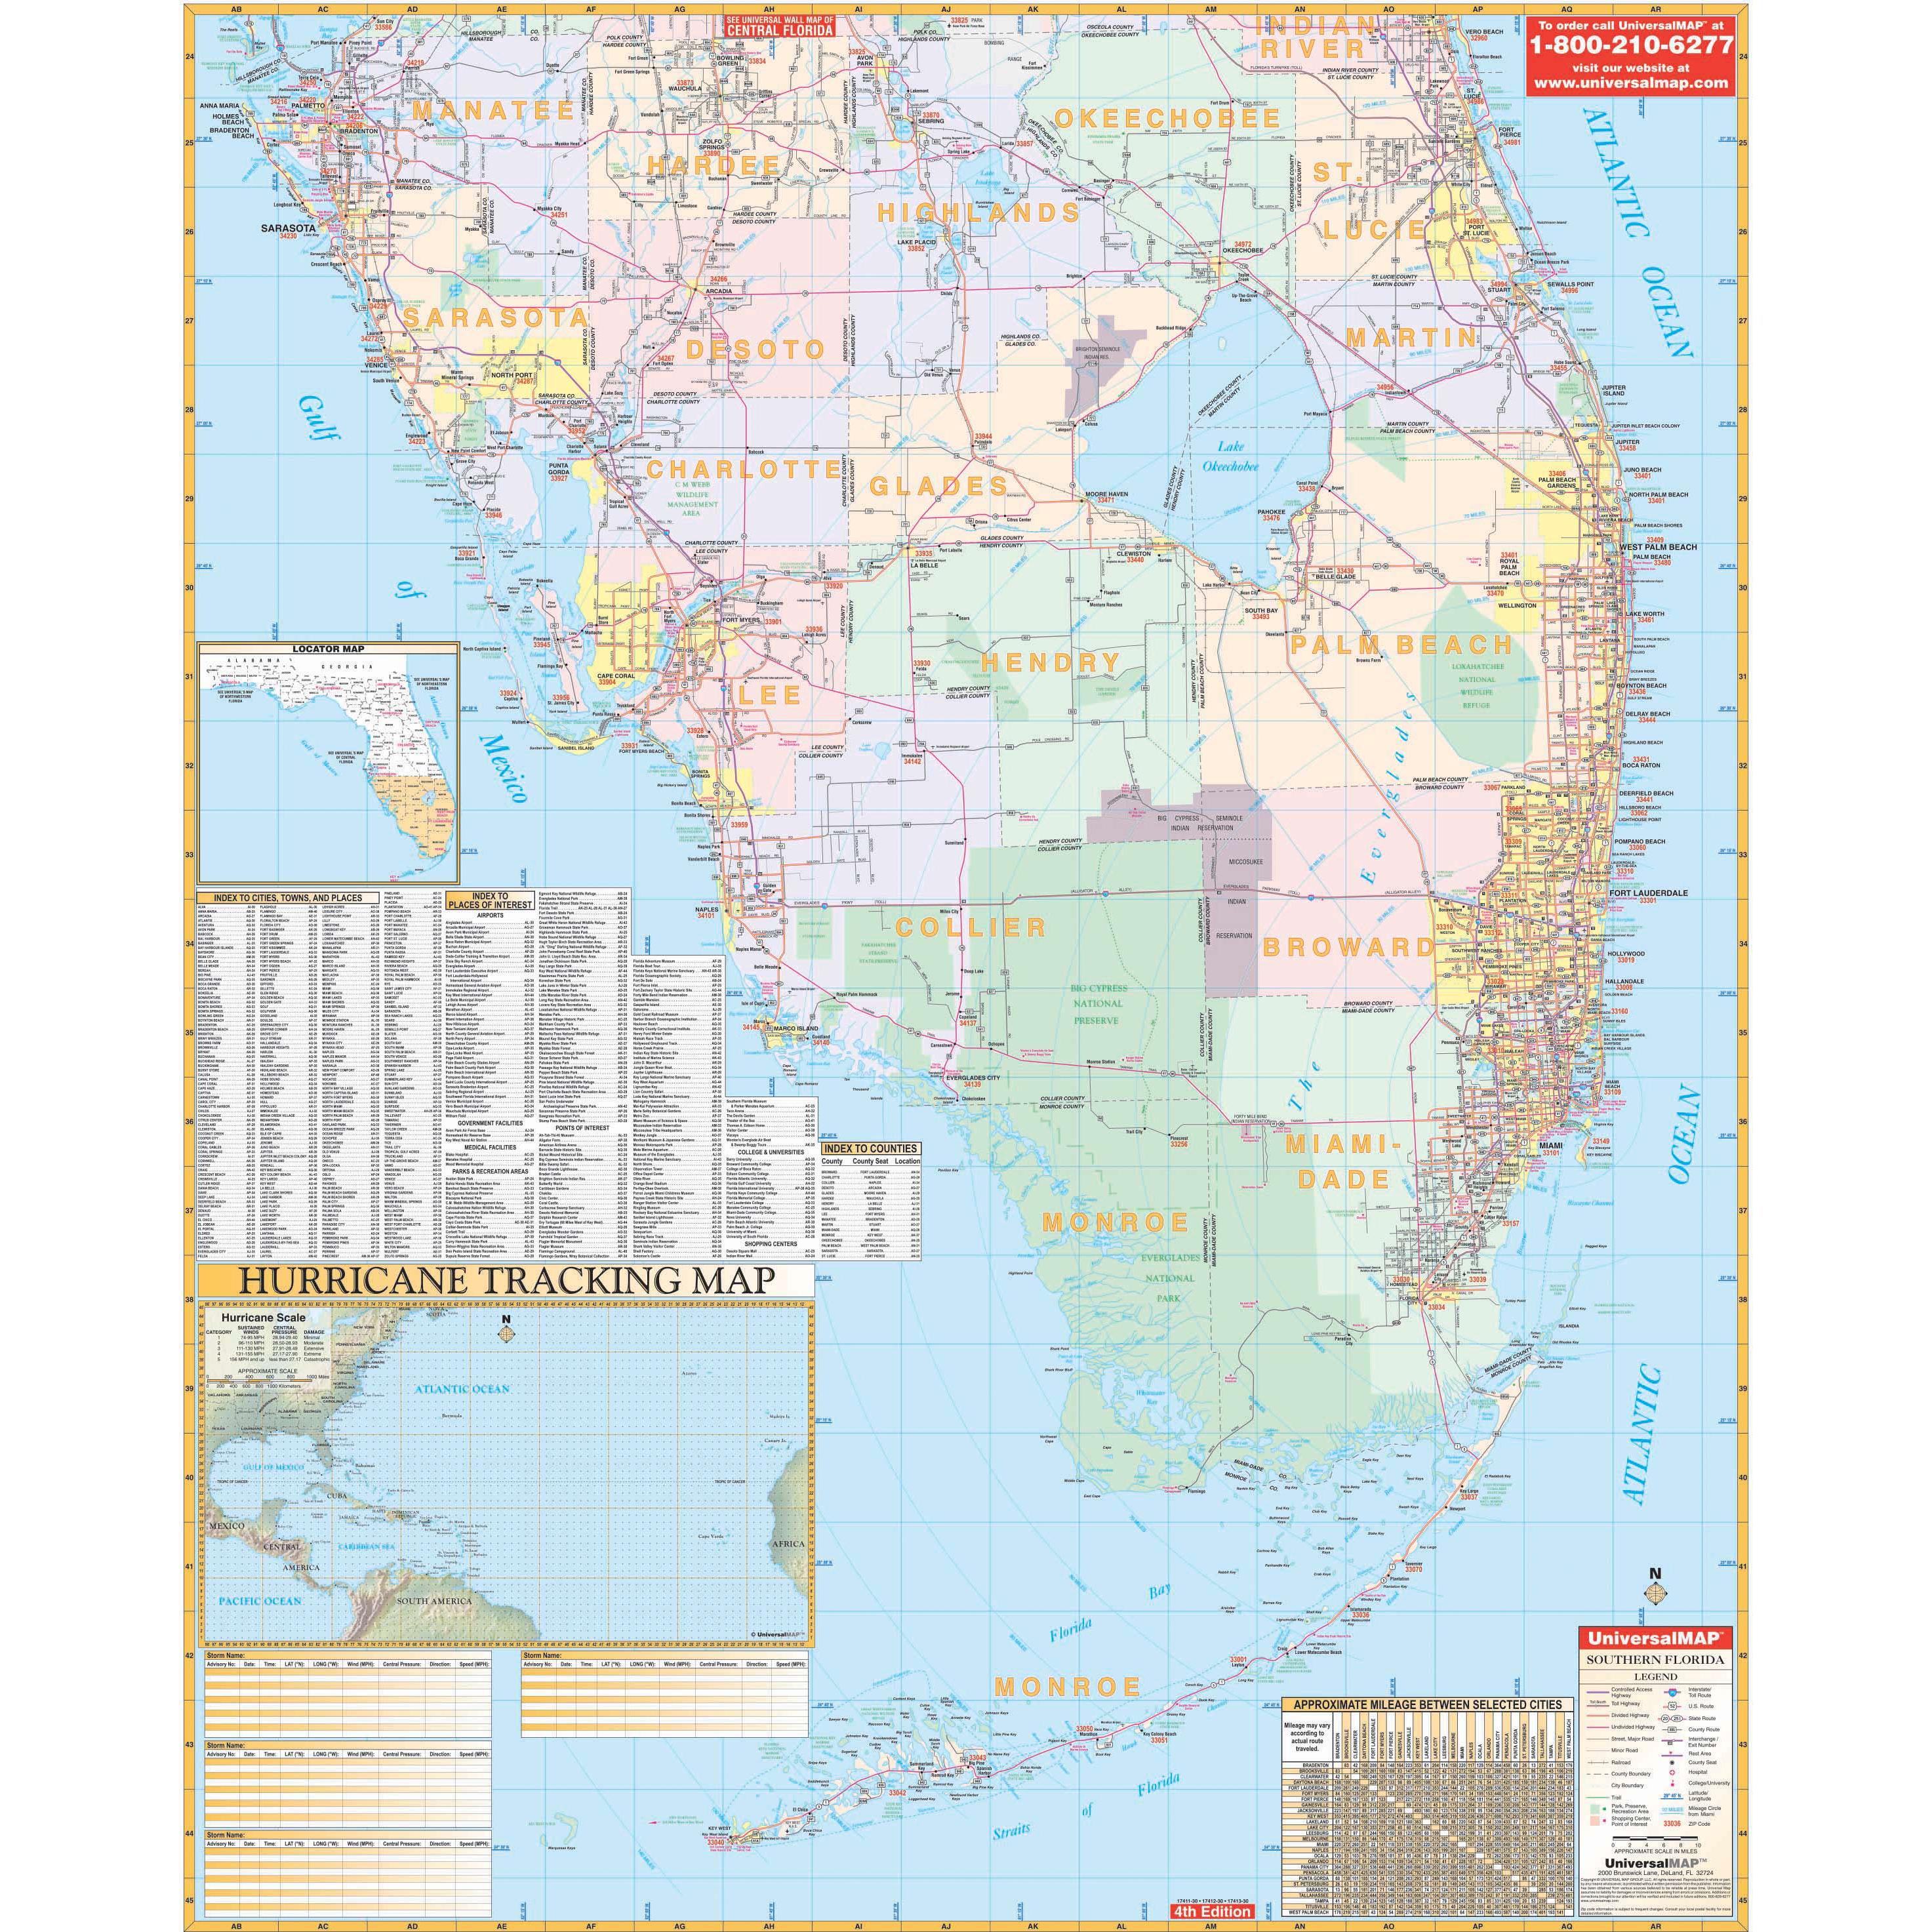 Folded Maps: Miami, Fort Lauderdale, and West Palm Beach Regional Map